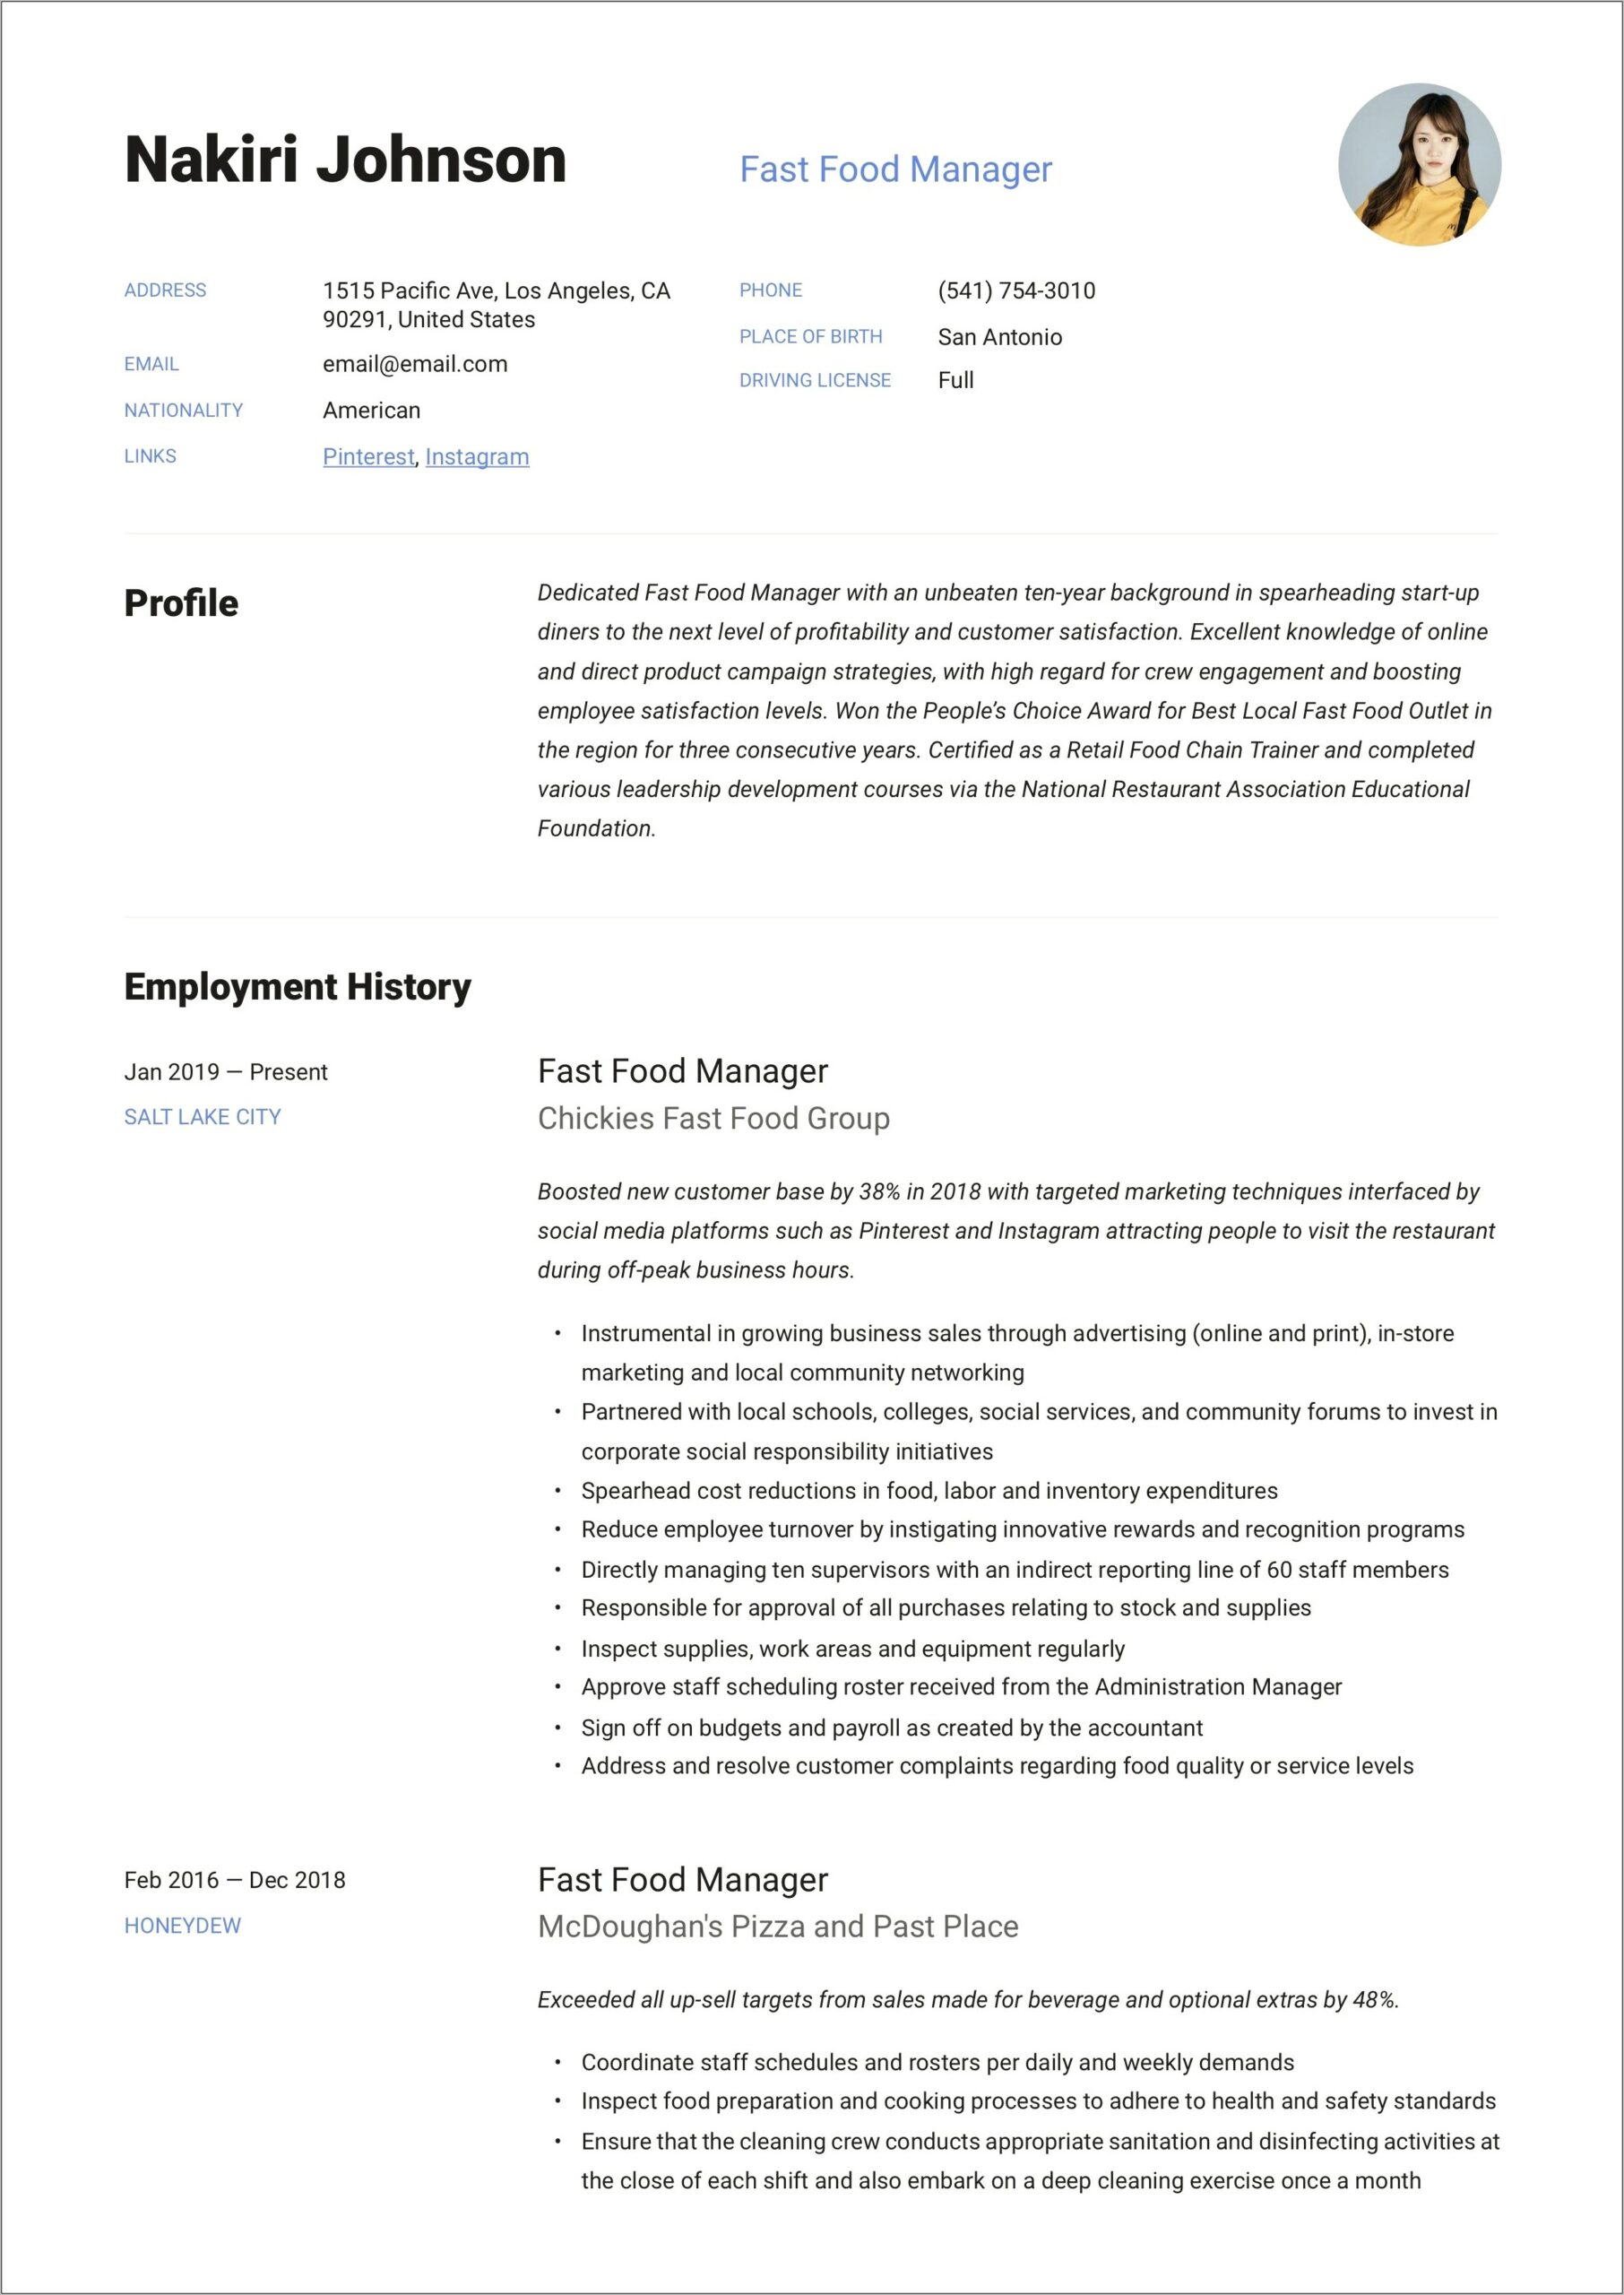 Describe Fast Food Management Experience On A Resume